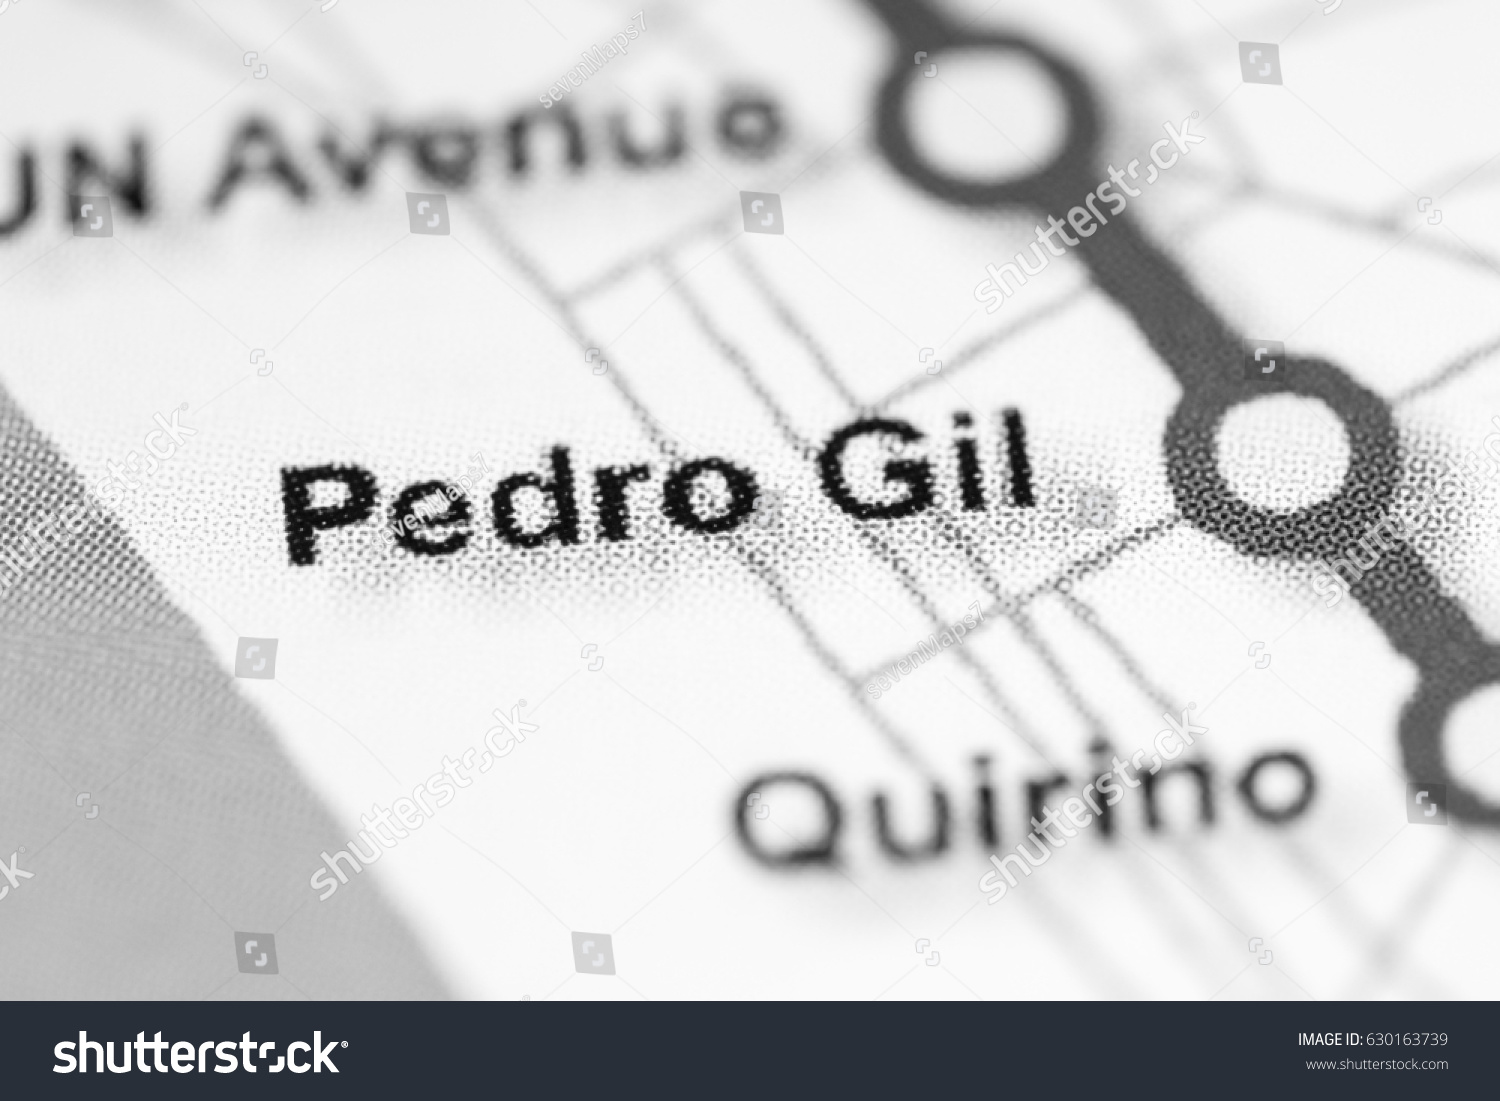 Pedro Gil Station Map Pedro Gil Images, Stock Photos & Vectors | Shutterstock